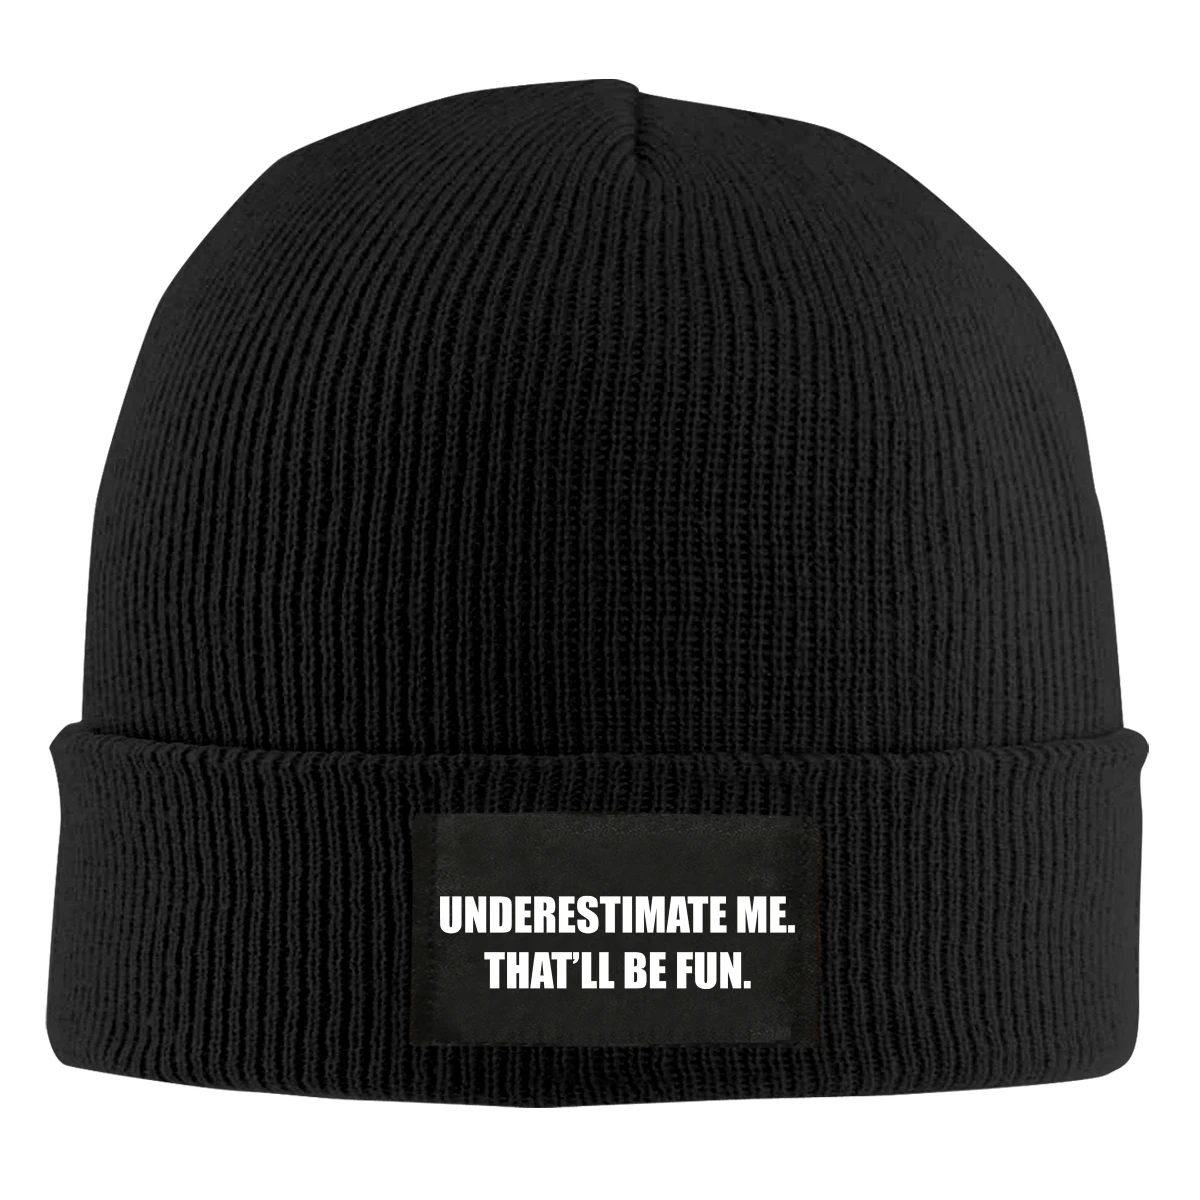 

Underestimate Me That'll Be Fun Beanie Hats For Men Women With Designs Winter Slouchy Knit Skull Cap